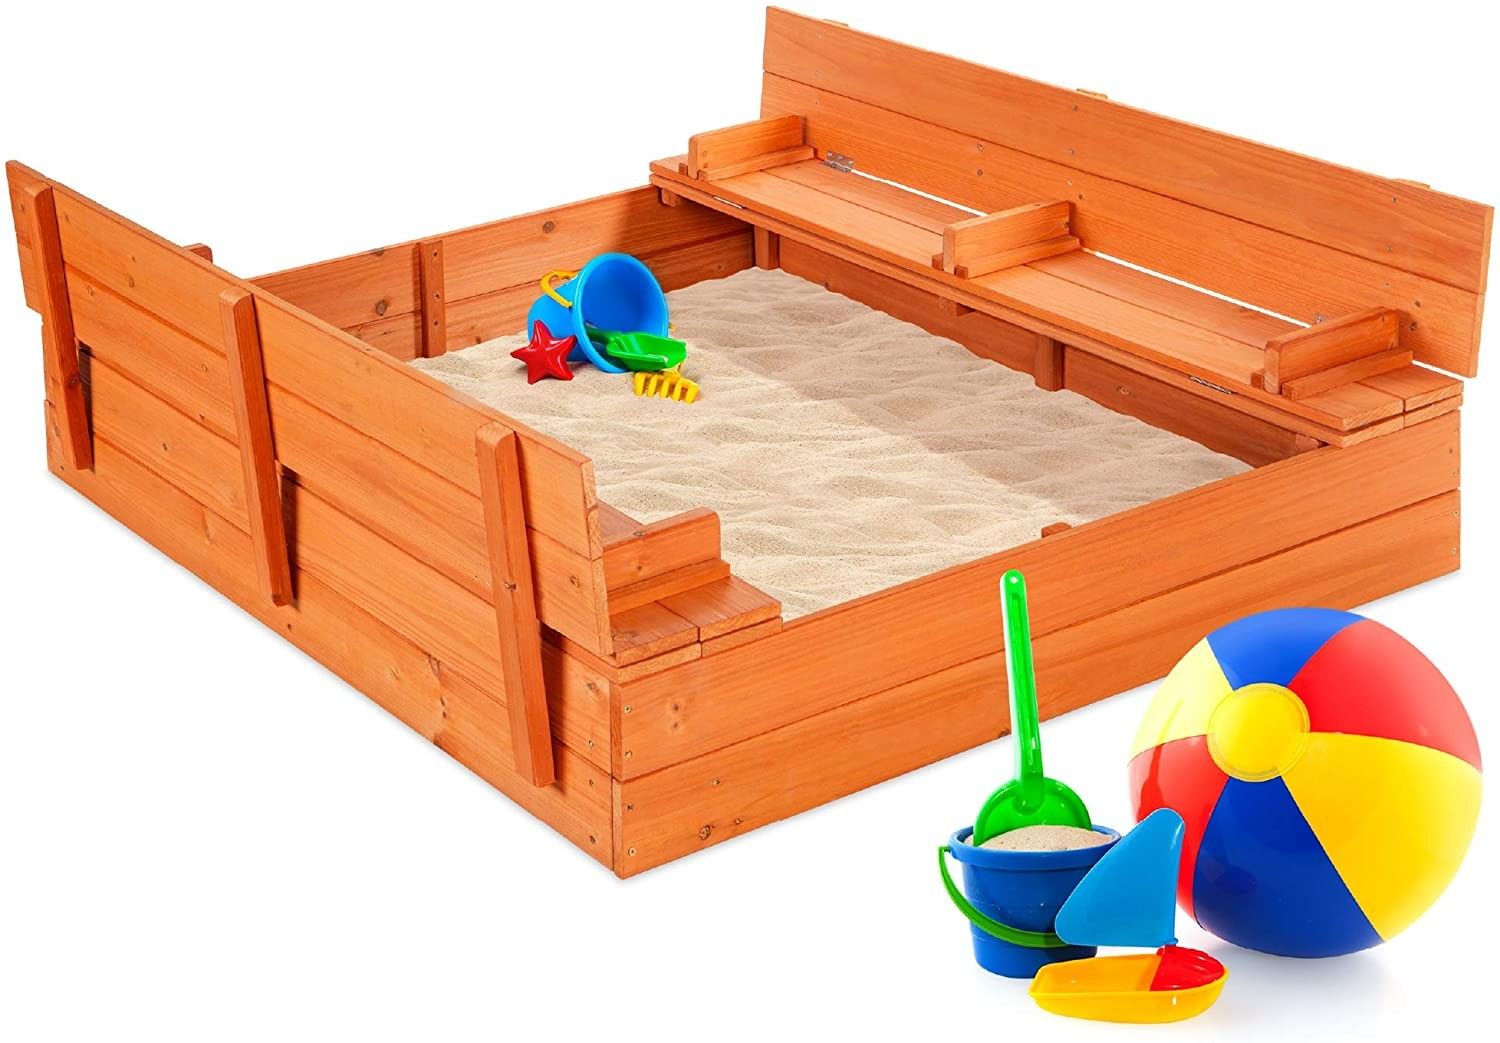 Wooden Sandbox for Kids with 2 Foldable Bench Seats, Sand Protection, Brown